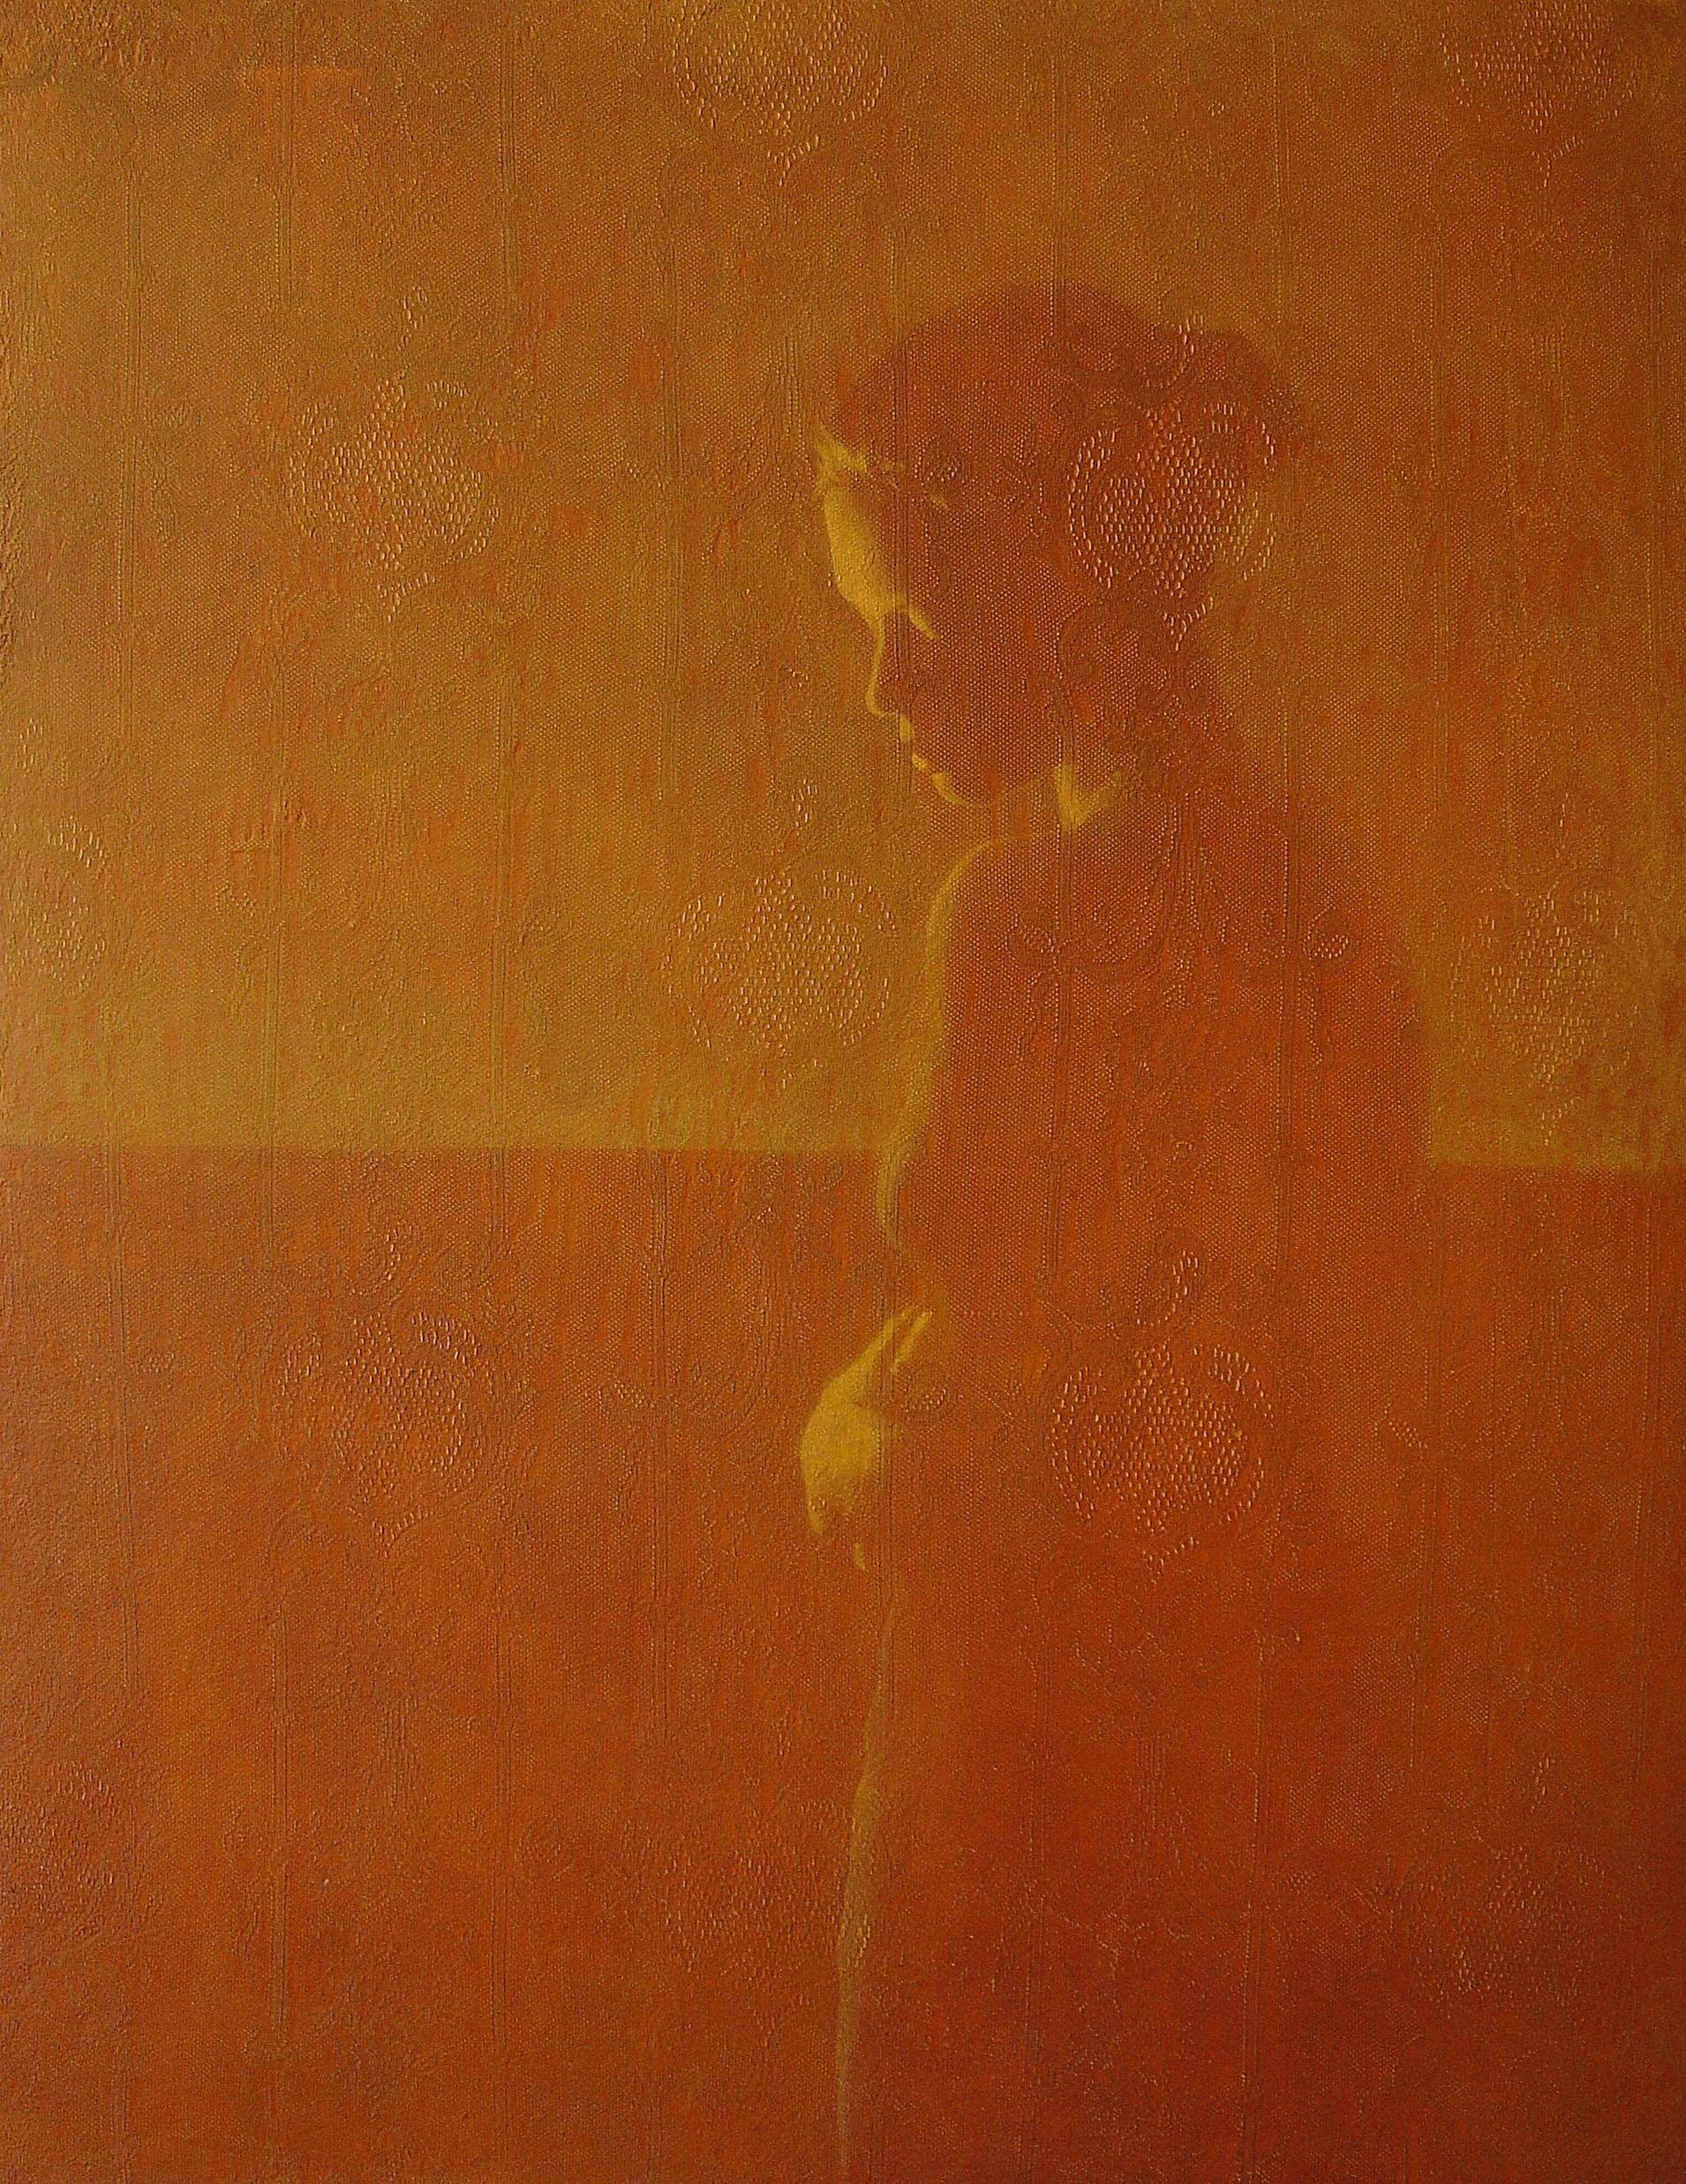 Susan Hall Figurative Painting - PASTORAL - contemplative dark orange painting of young woman or girl on pattern